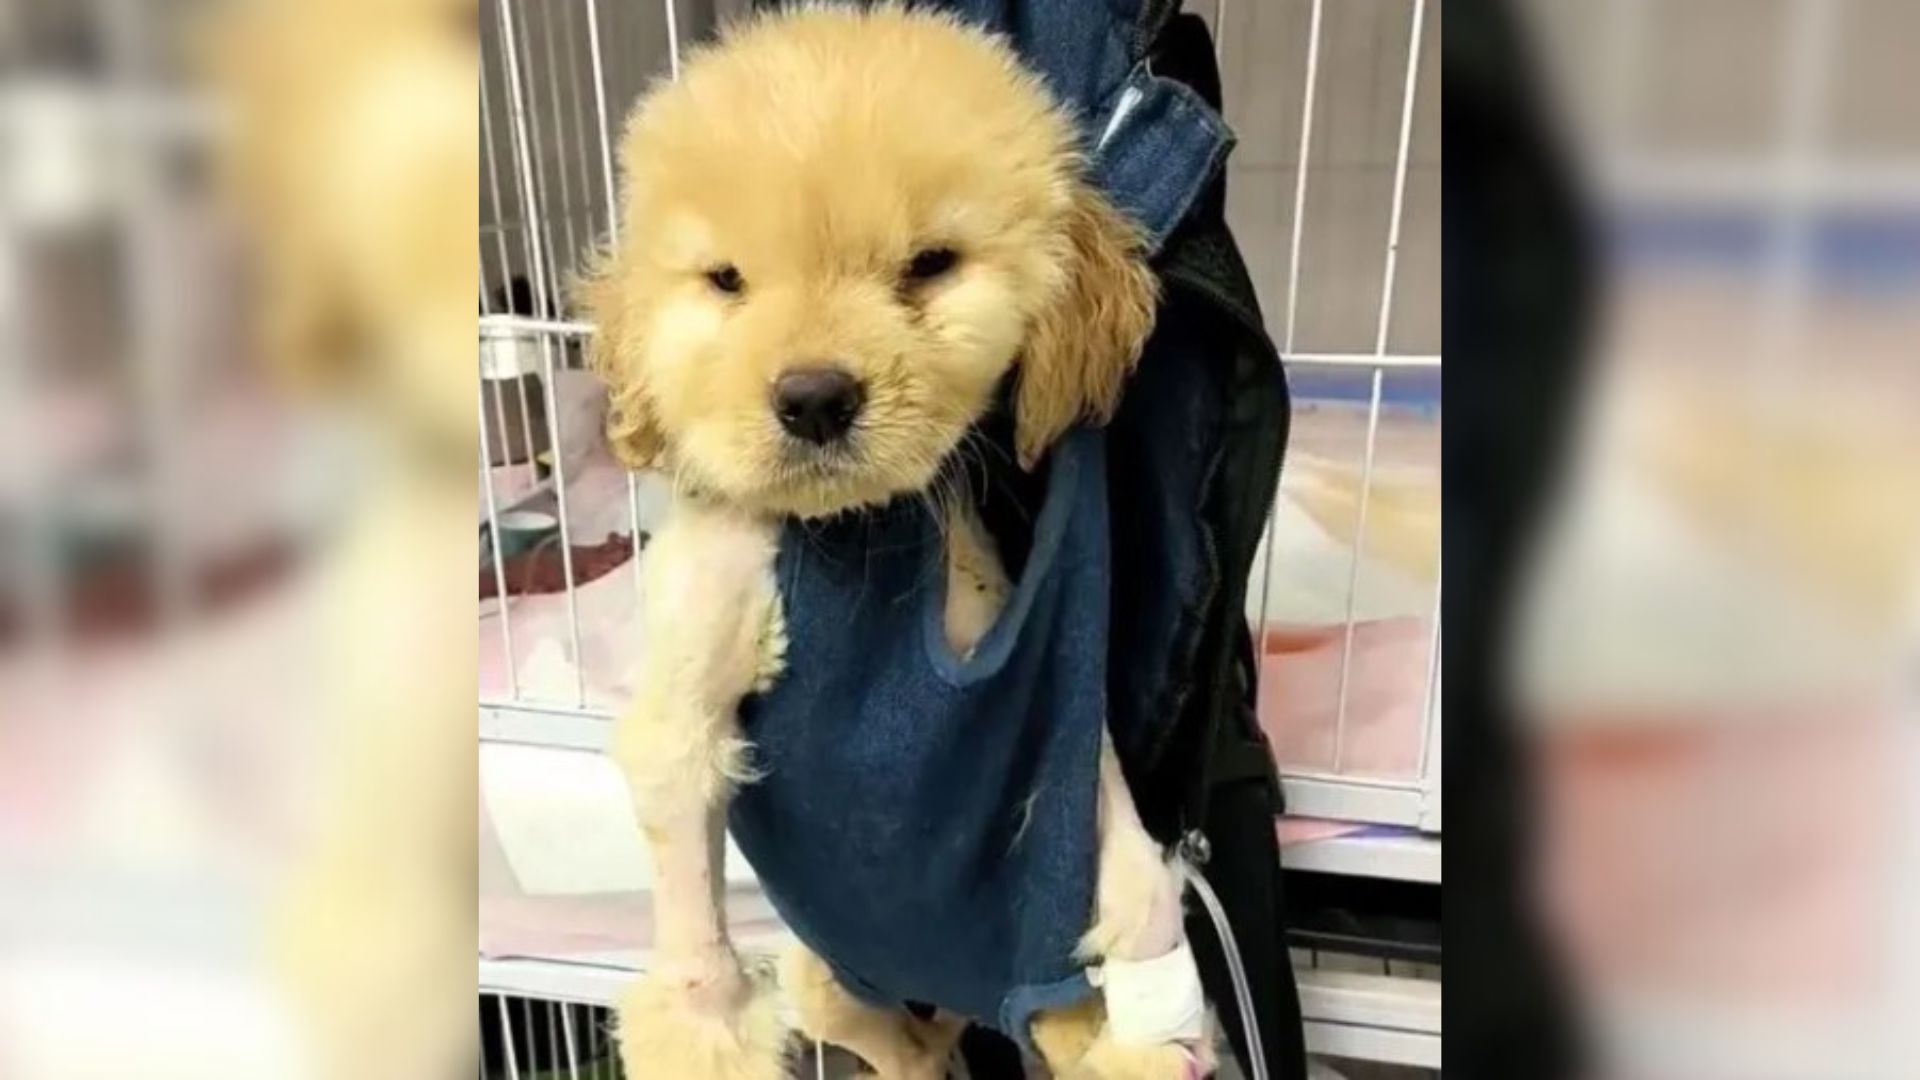 Owners Abandoned Their Paralyzed Puppy At The Vet Because They Couldn’t Afford His Medical Bills